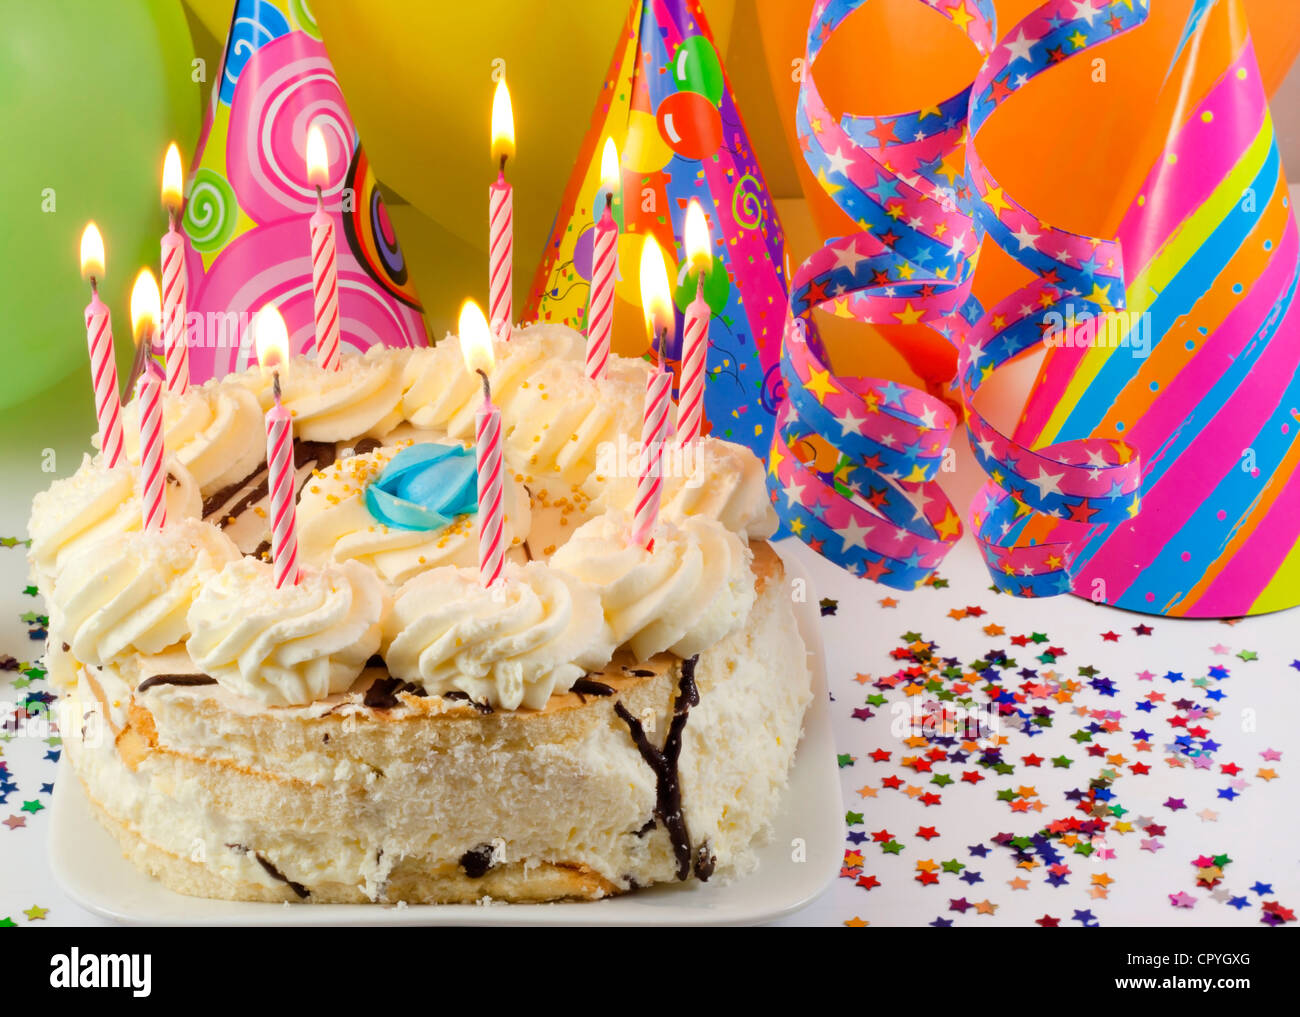 Birthday cake and candles against colorful party background with hats and serpentines Stock Photo